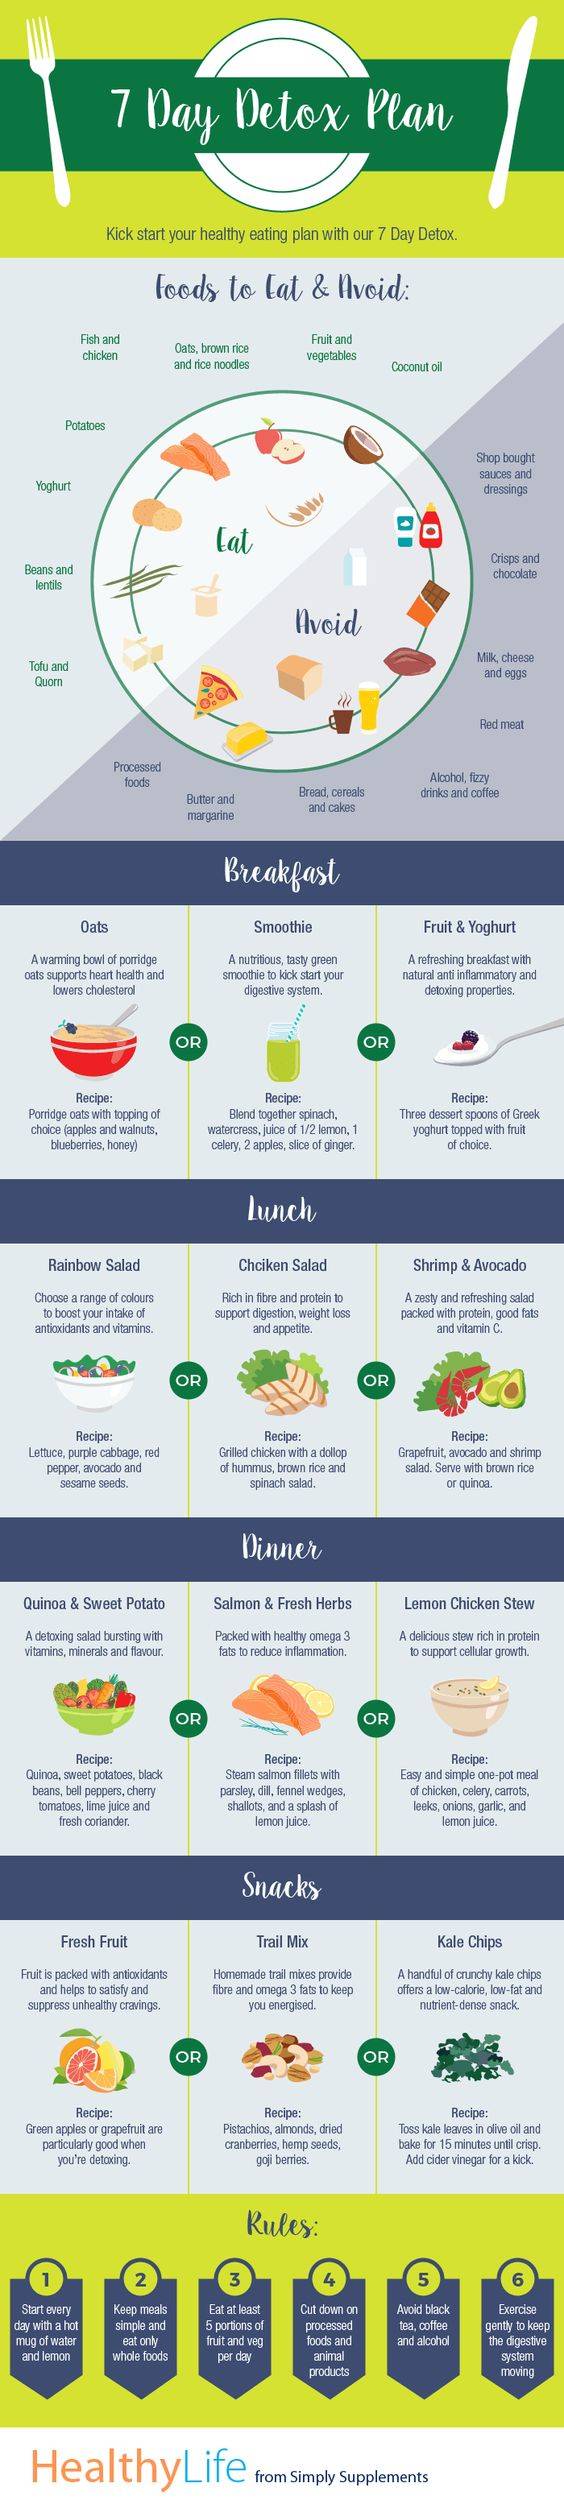 3-Day & 7-Day Detox Diet Plan For Weight Loss That Really Work  